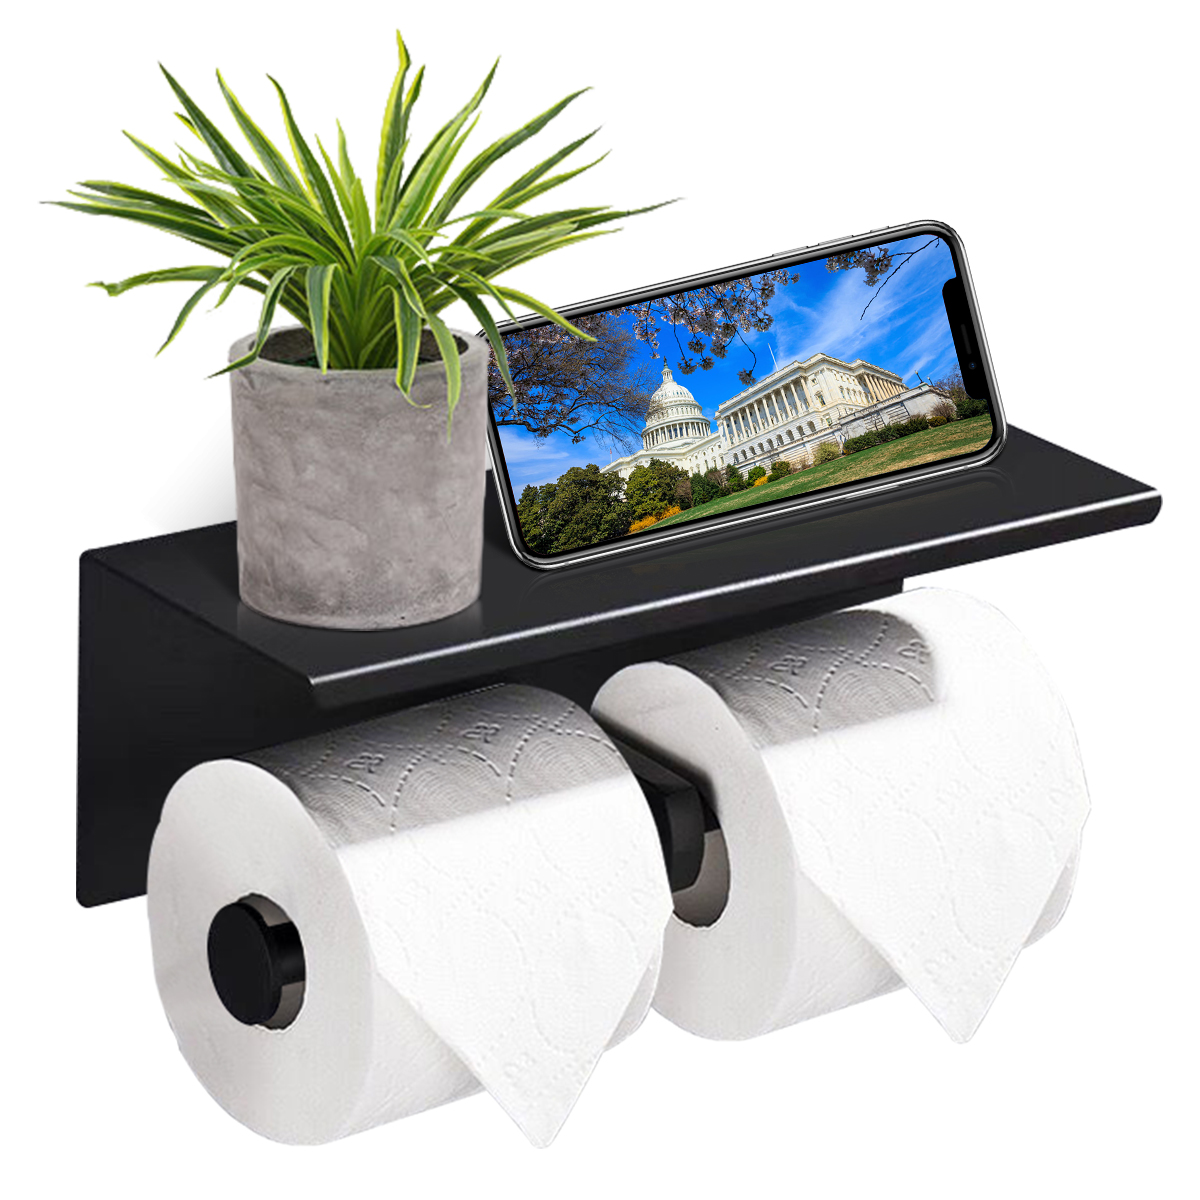 Double-Roll-Stainless-Steel-Toilet-Wall-Mount-Mobile-Phone-Holder-Paper-Shelf-1862991-1